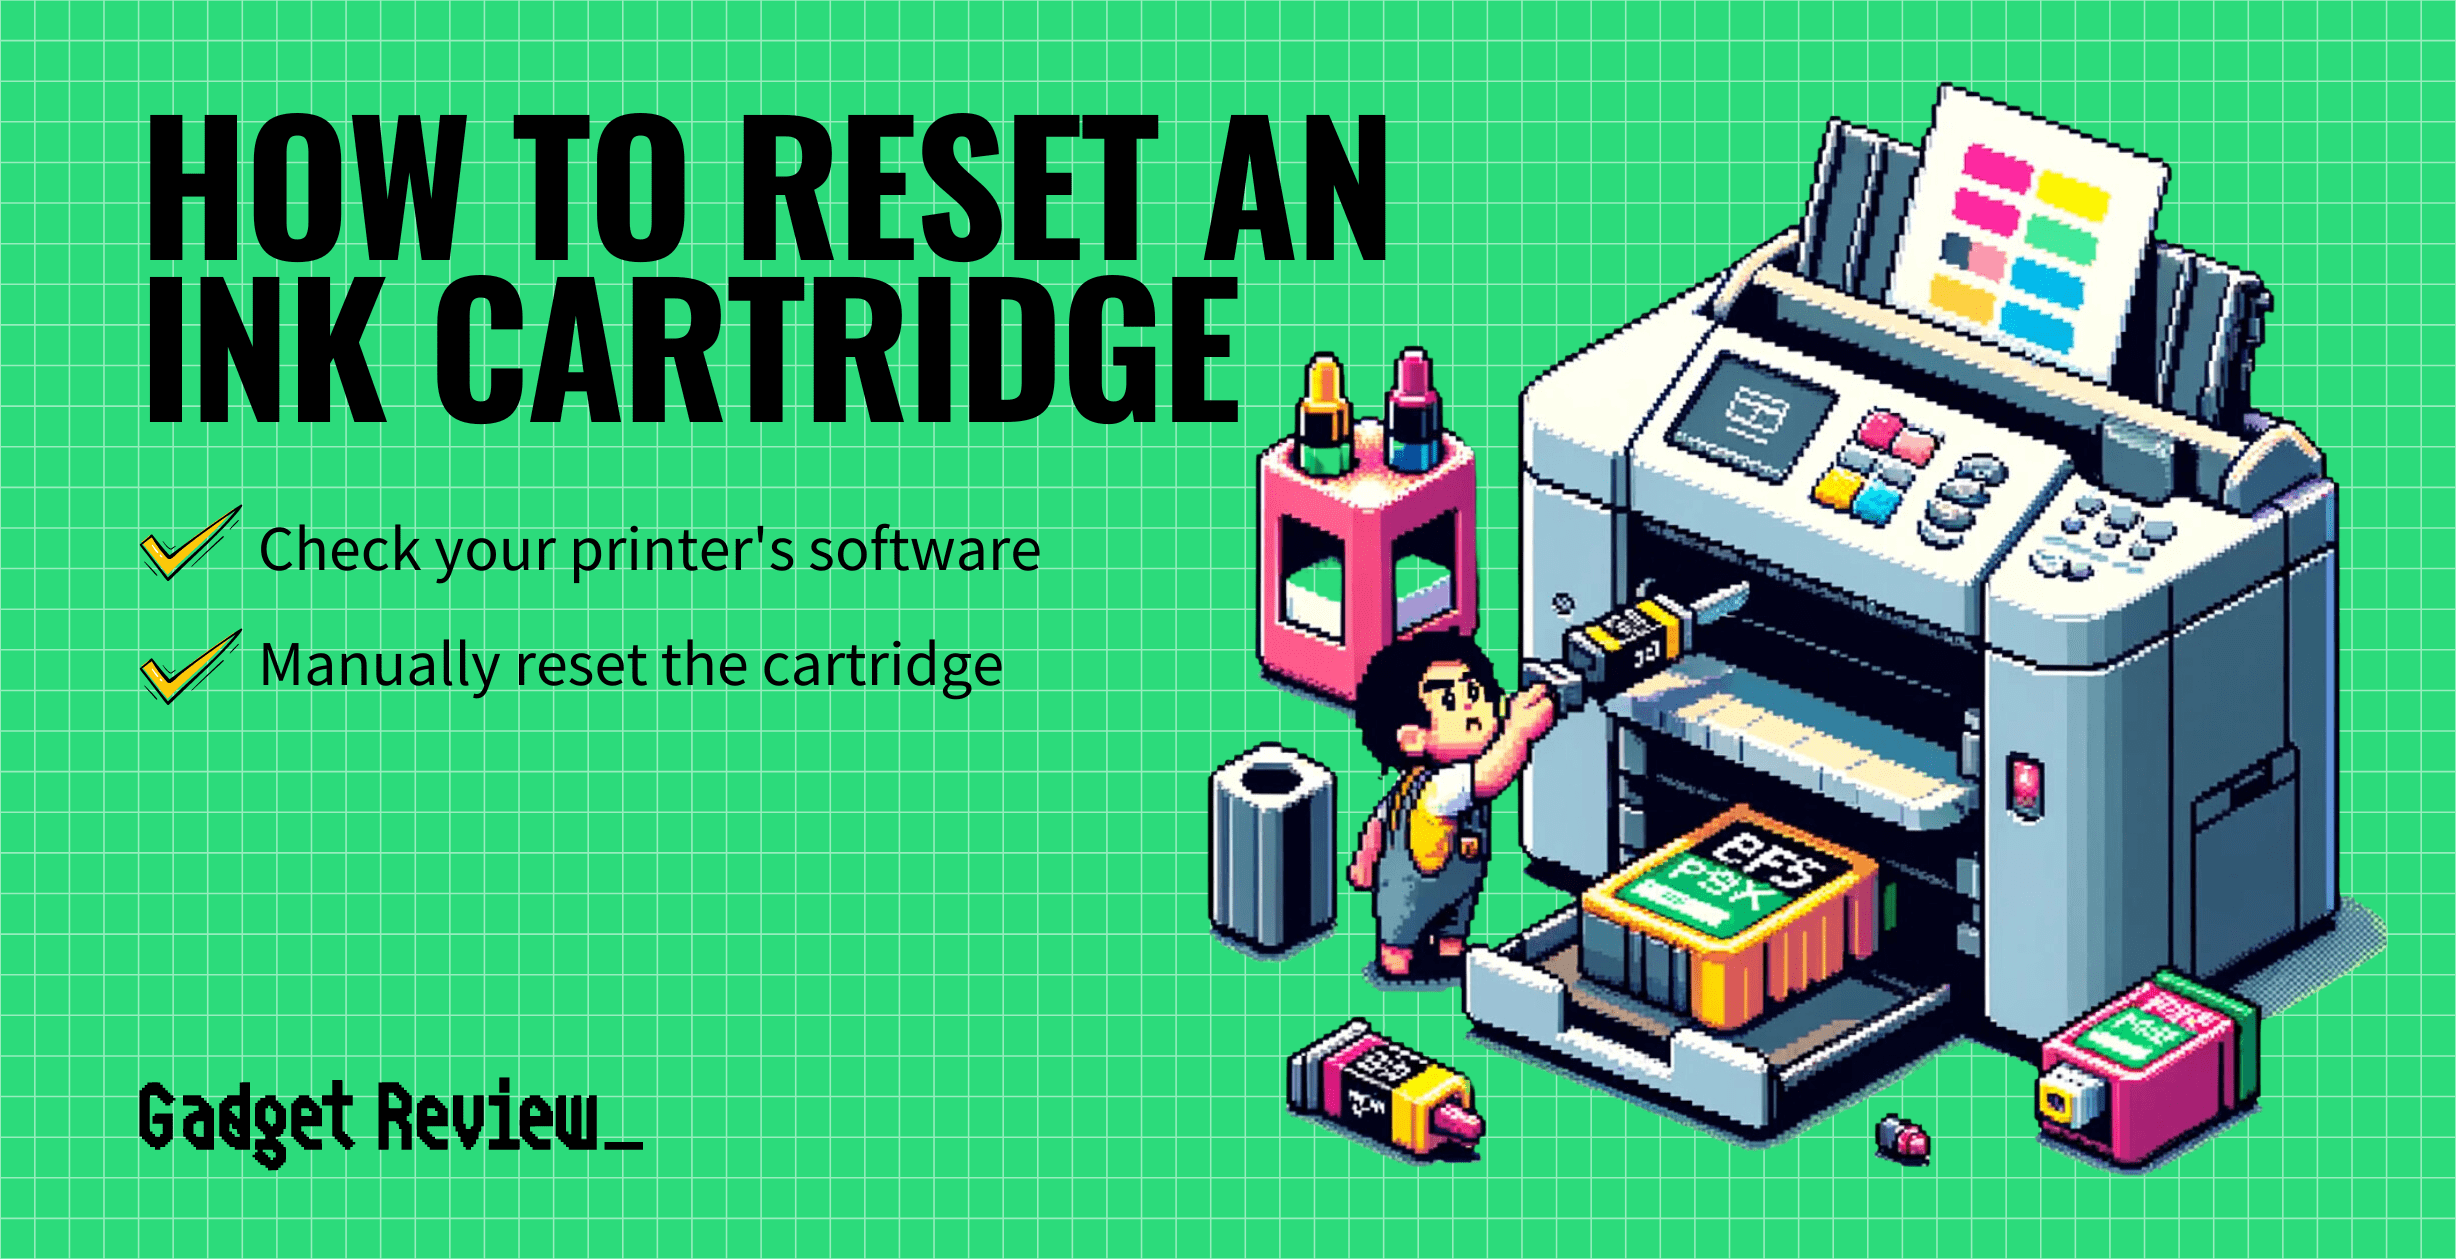 How To Reset an Ink Cartridge